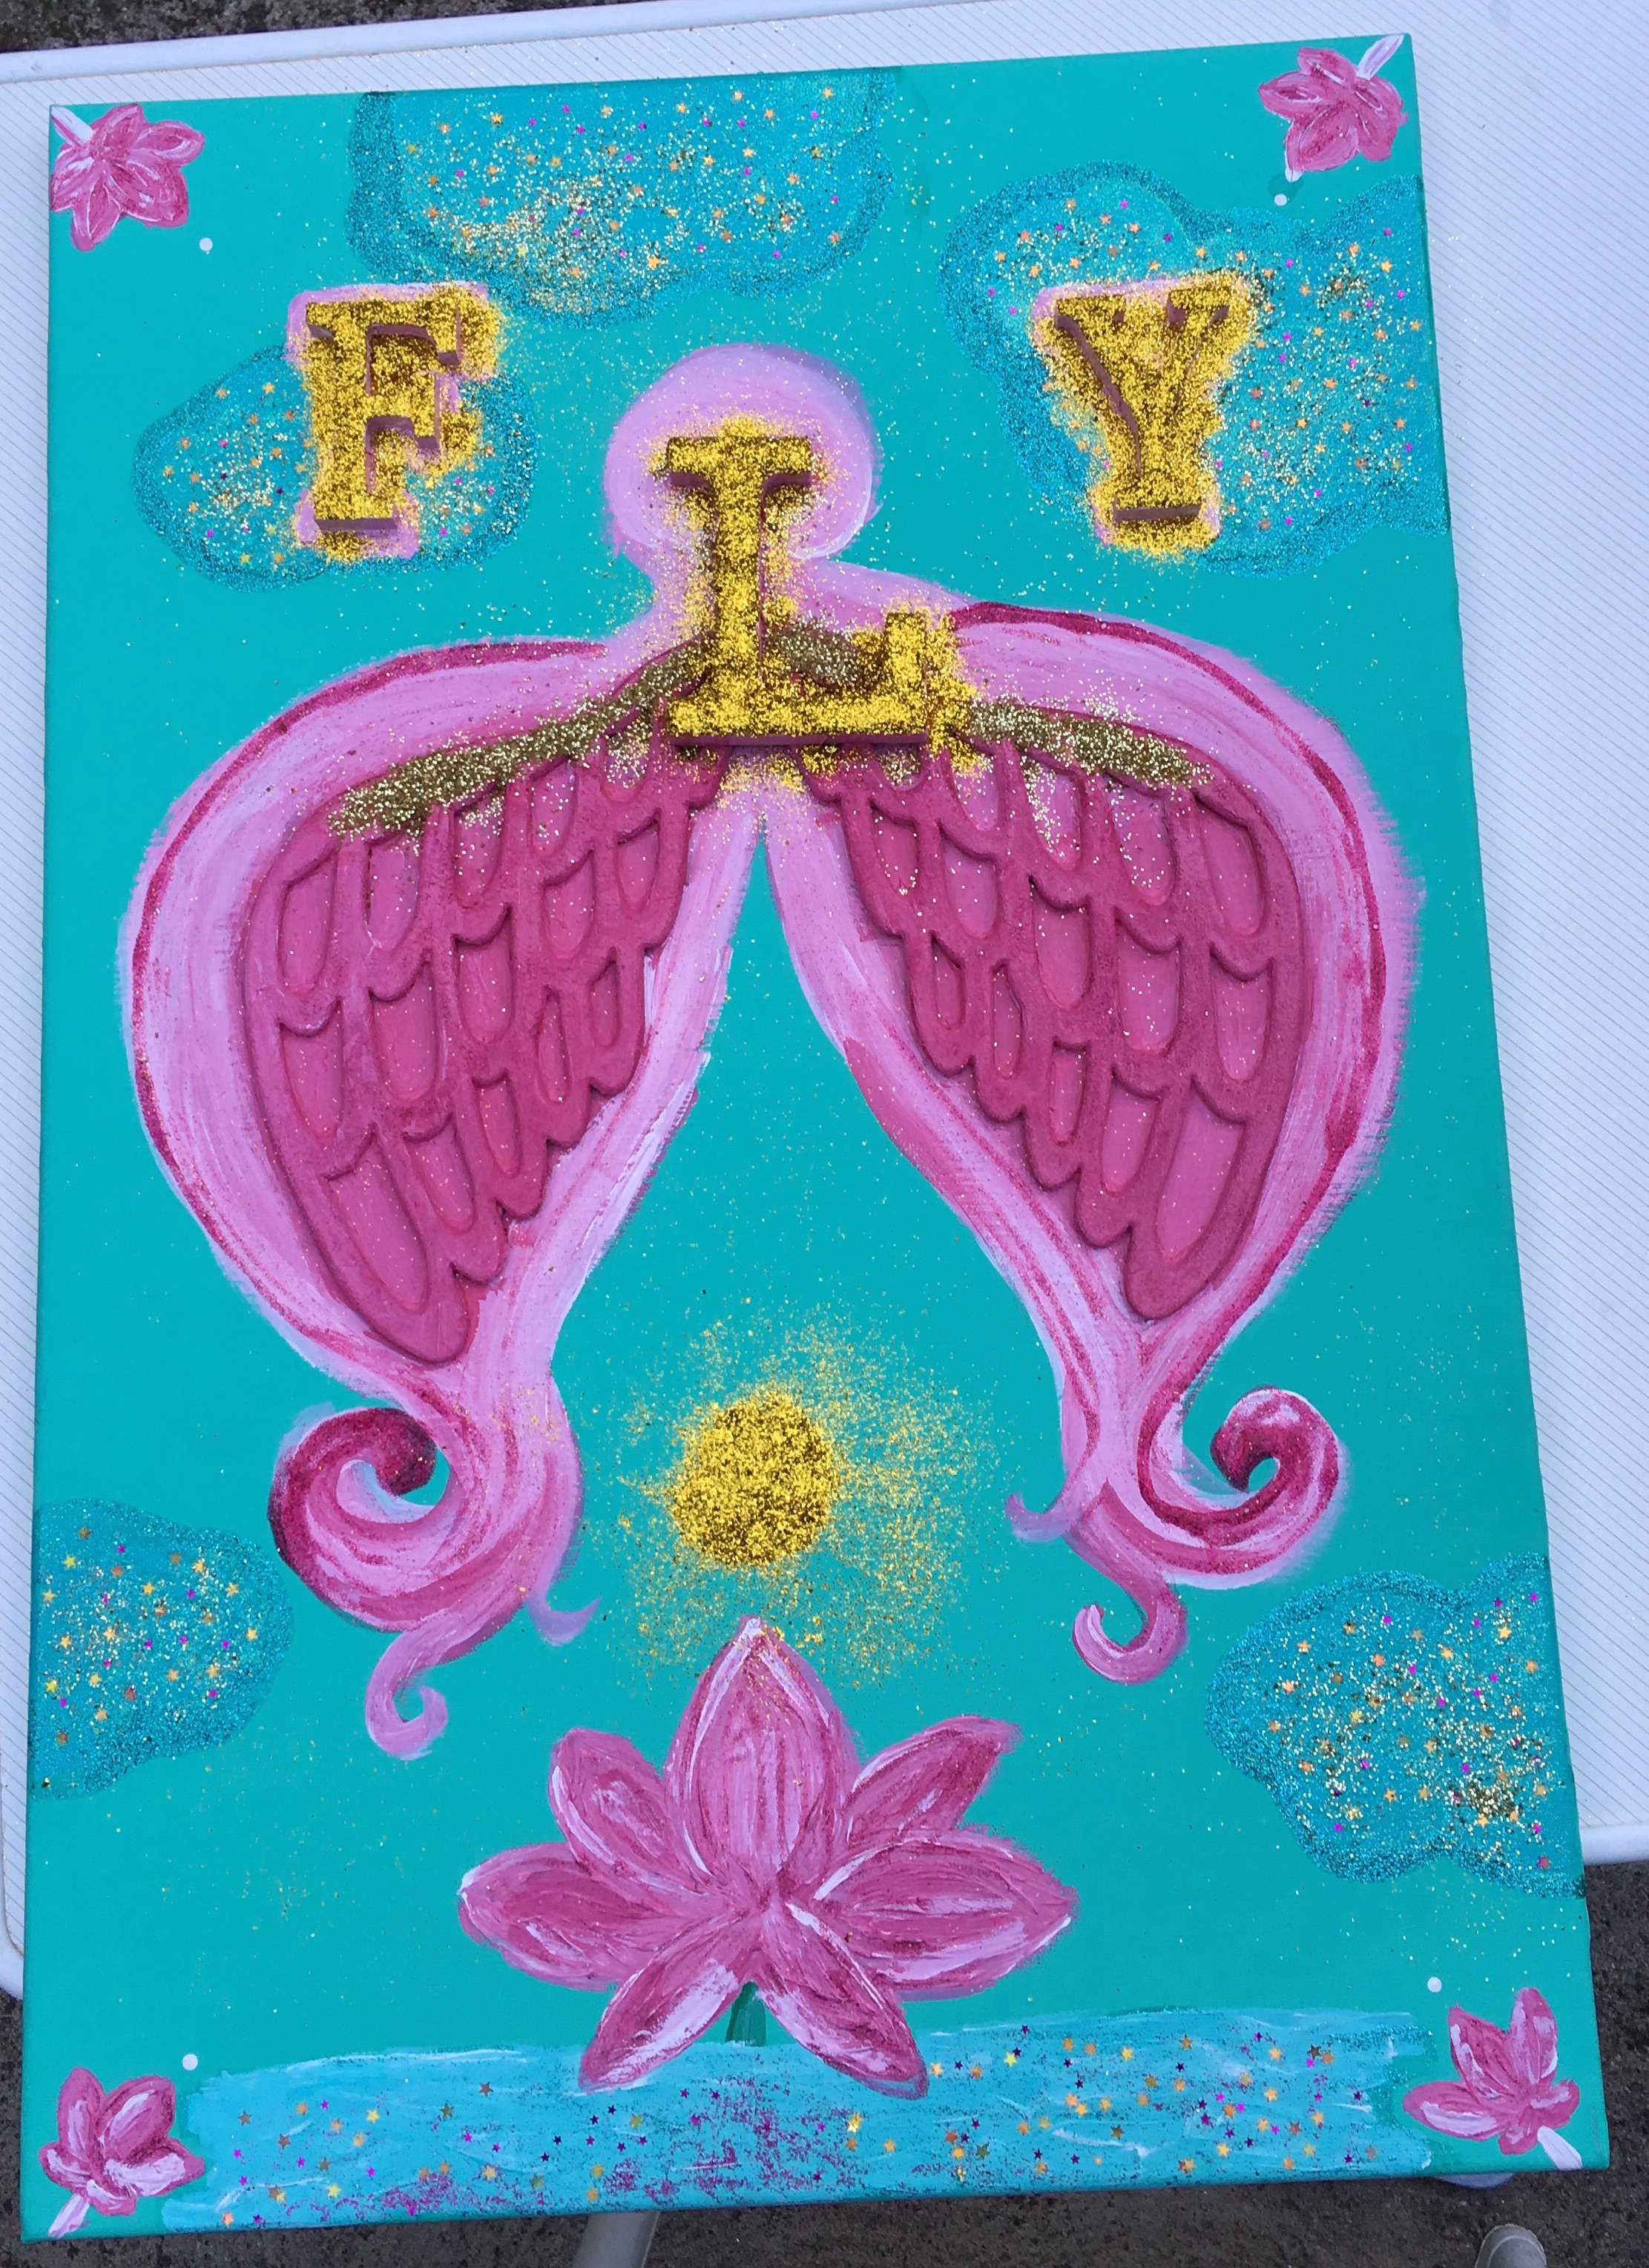 FLY LOVE (in process)